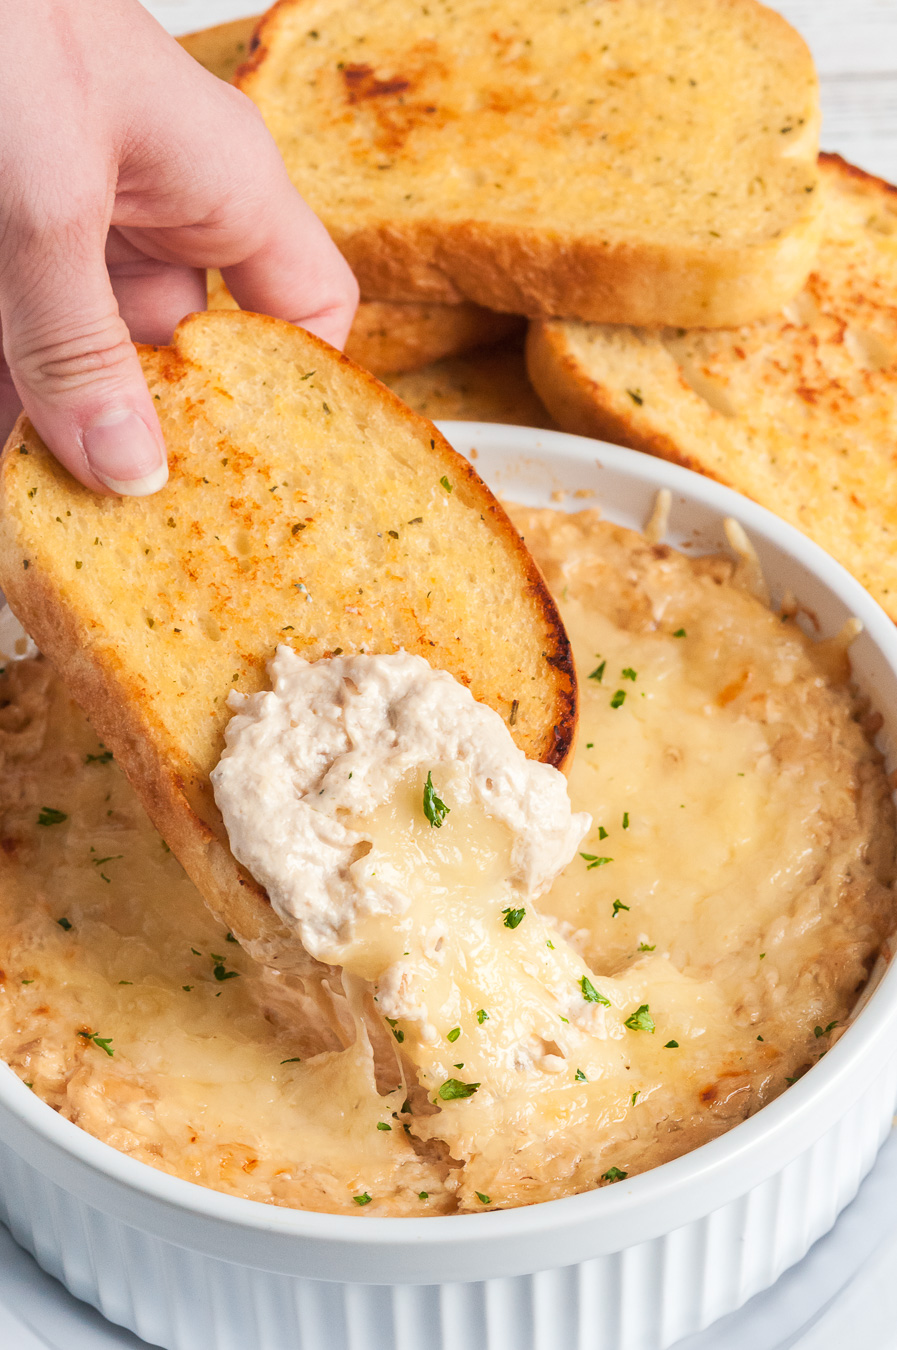 dipping a piece of garlic bread into french onion dip